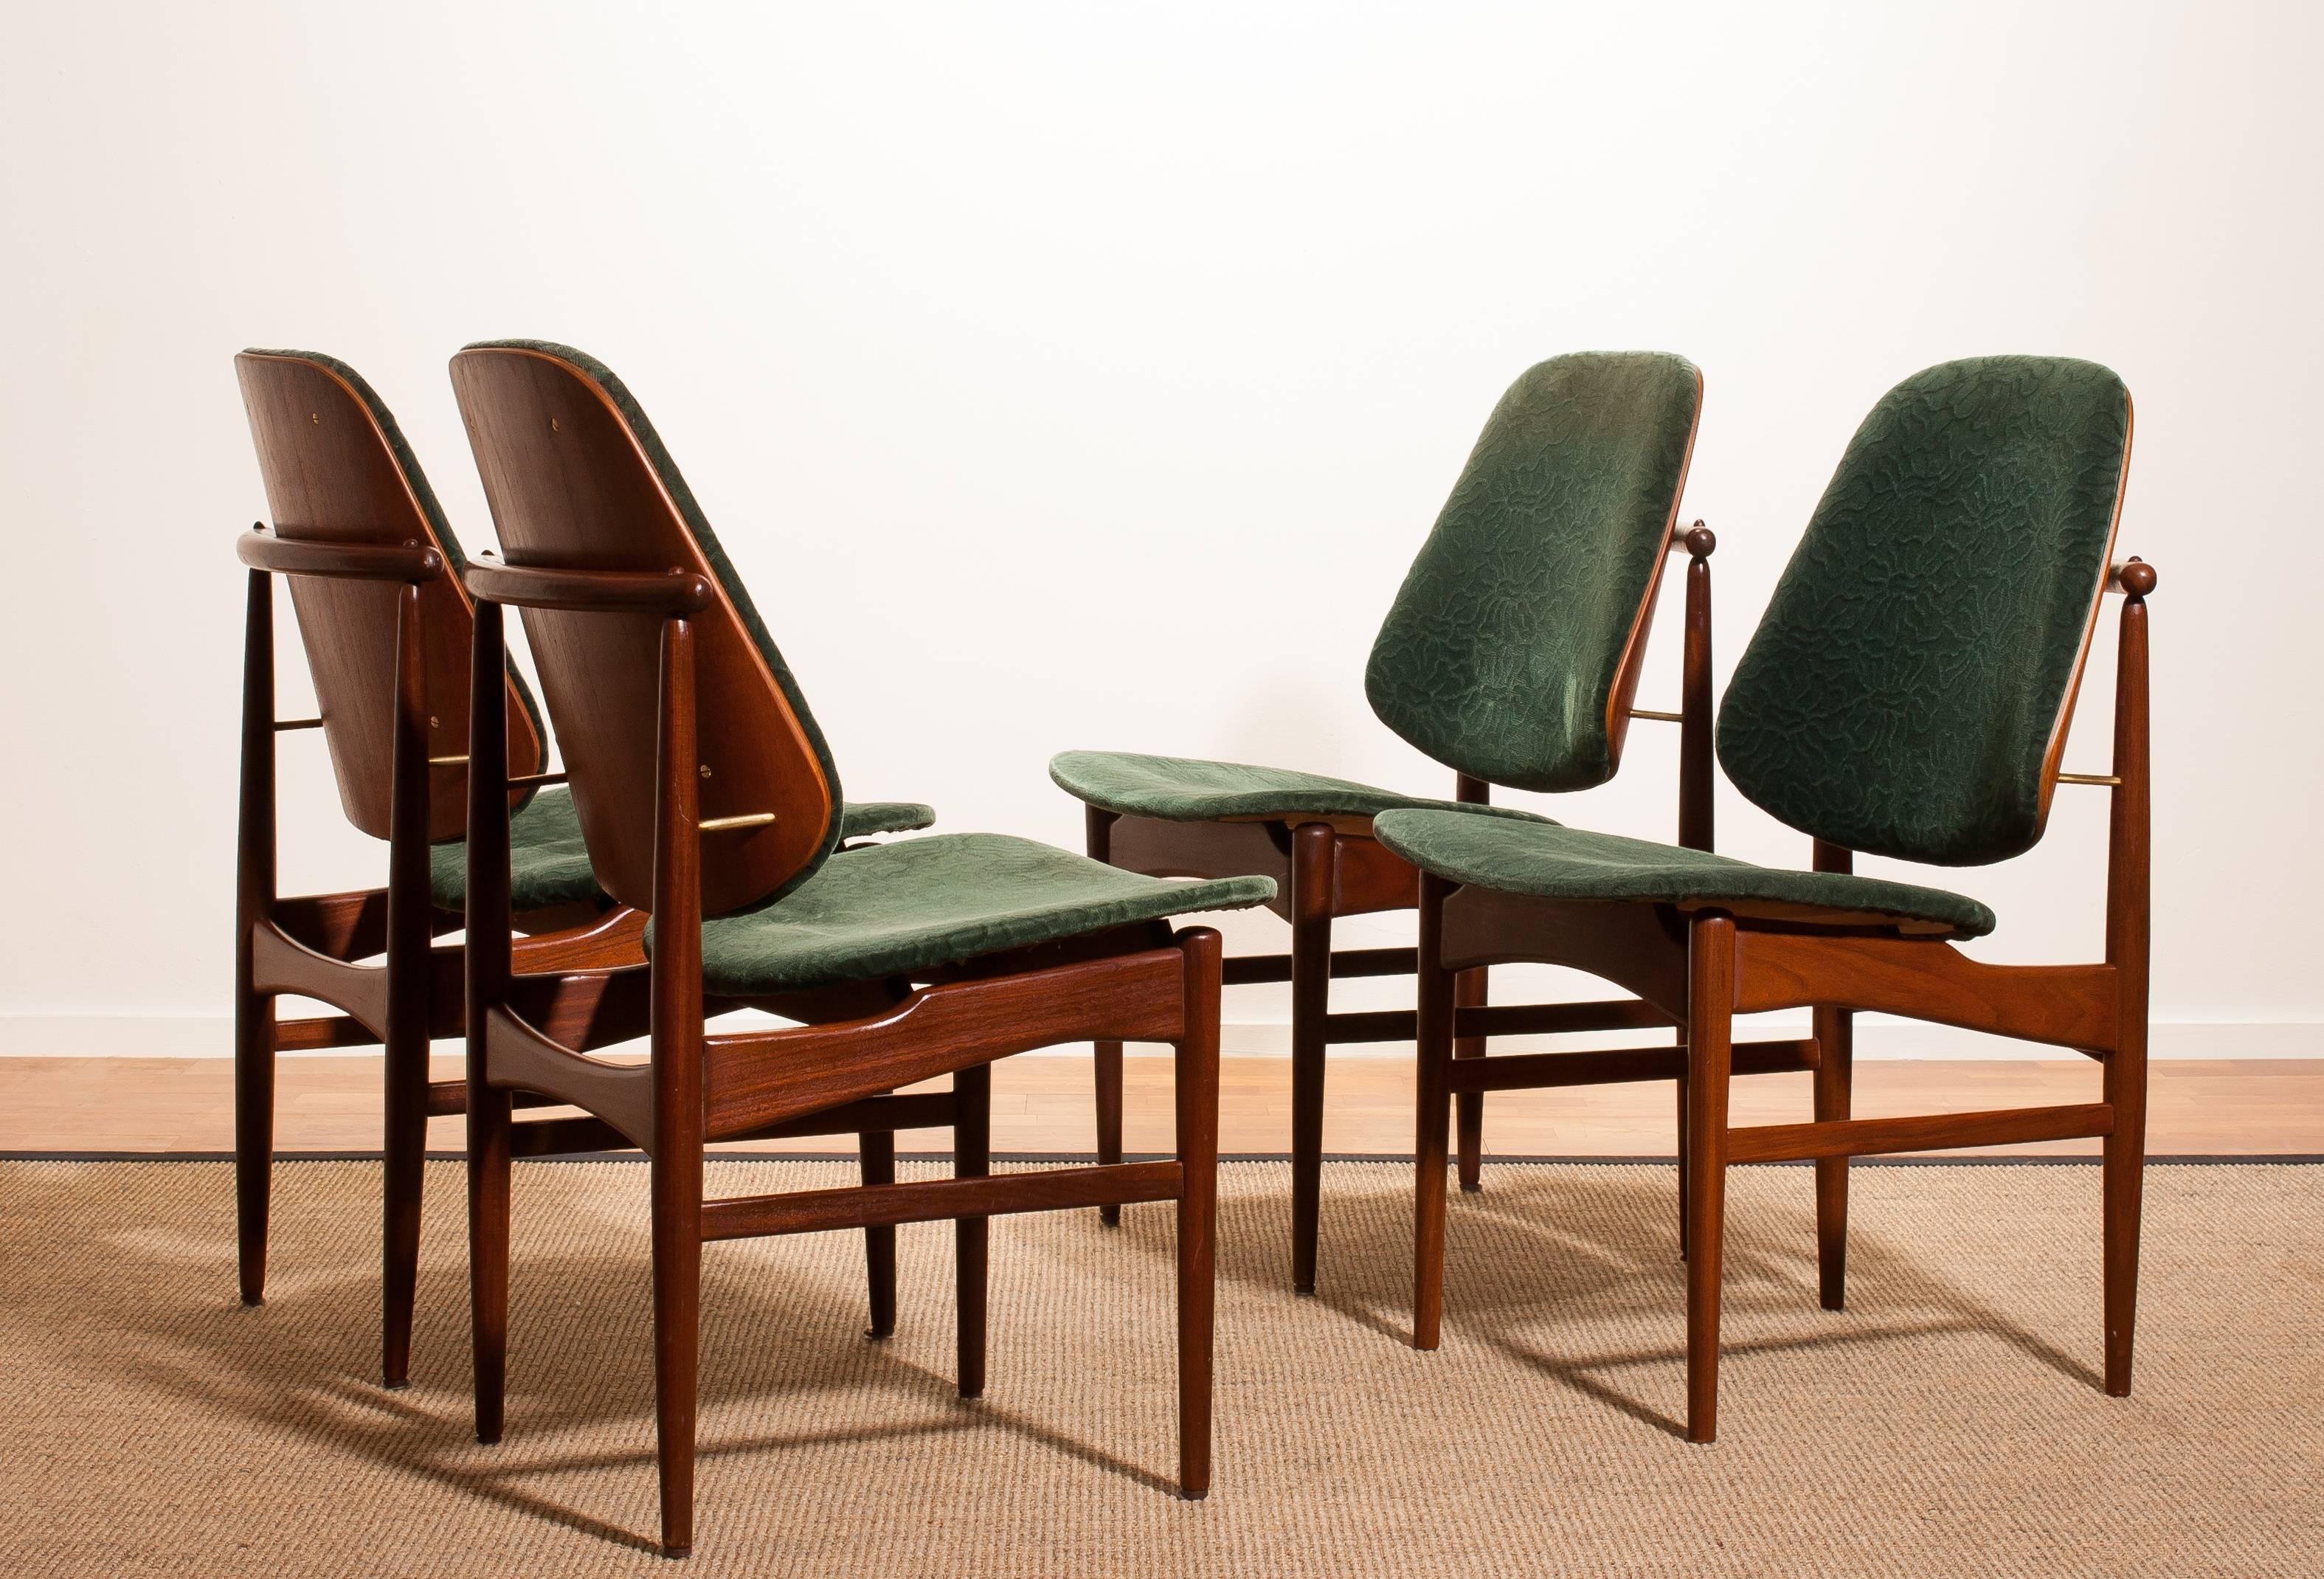 Beautiful set of four Arne Vodder design armchairs made by France & Daverkosen, Denmark. Seat and back covered in original bottle-green velvet fabric. These chairs sit extremely comfortable and are beautifully finished with beautiful bronze